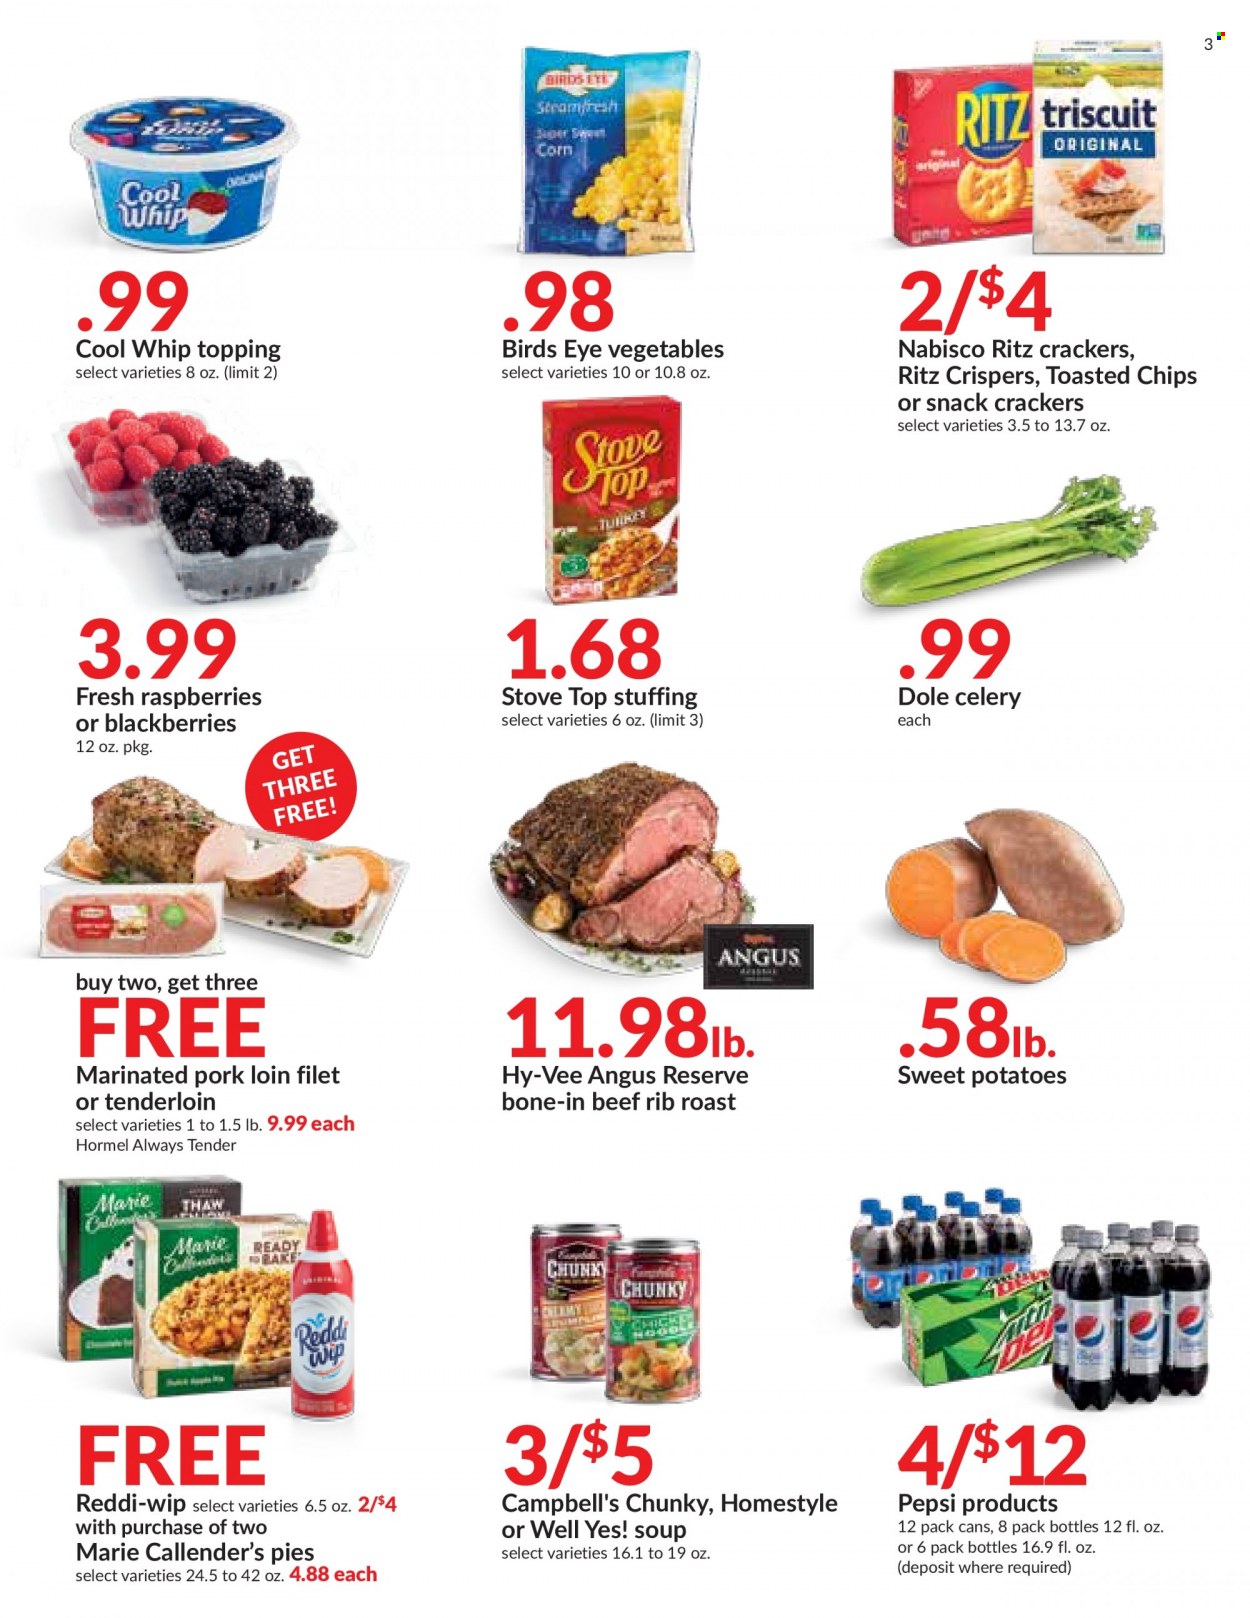 thumbnail - Hy-Vee Flyer - 11/17/2021 - 11/25/2021 - Sales products - celery, sweet potato, potatoes, Dole, blackberries, Campbell's, soup, Bird's Eye, Marie Callender's, Hormel, Cool Whip, crackers, RITZ, chips, topping, Pepsi, pork loin, pork meat, marinated pork. Page 3.